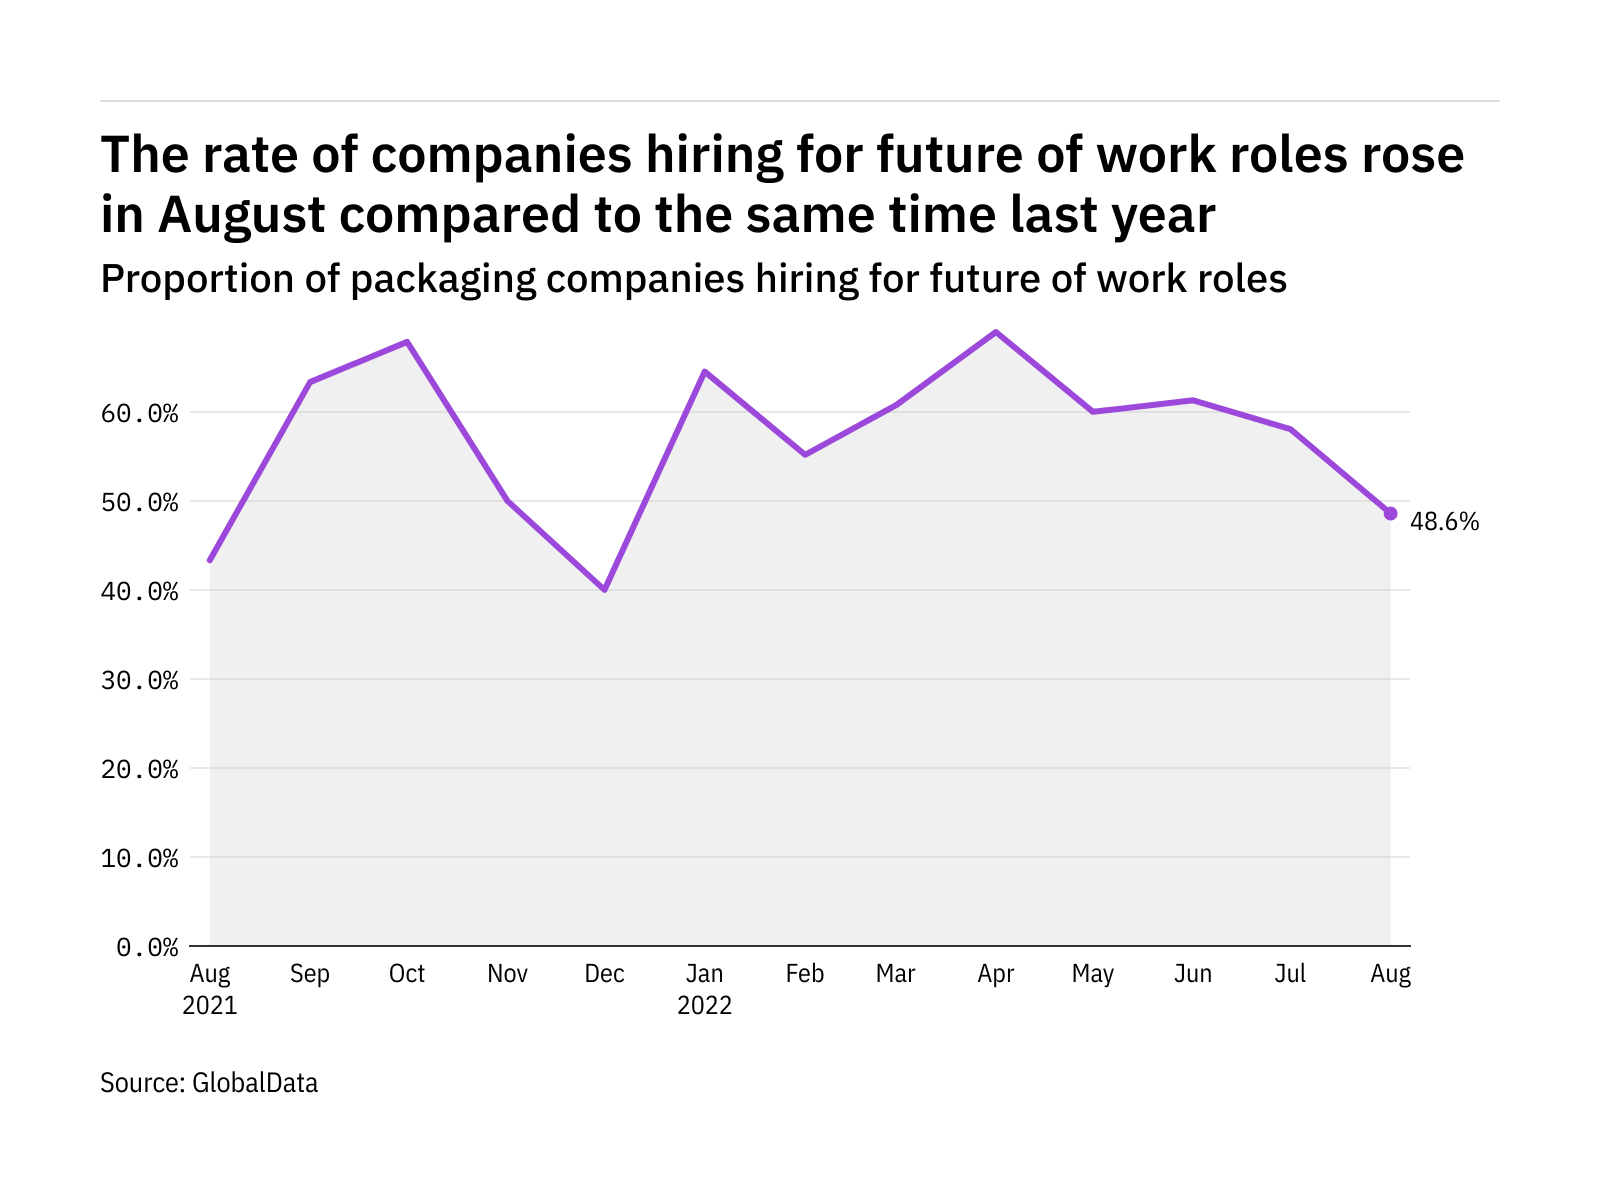 Future of work hiring levels in the packaging industry rose in August 2022